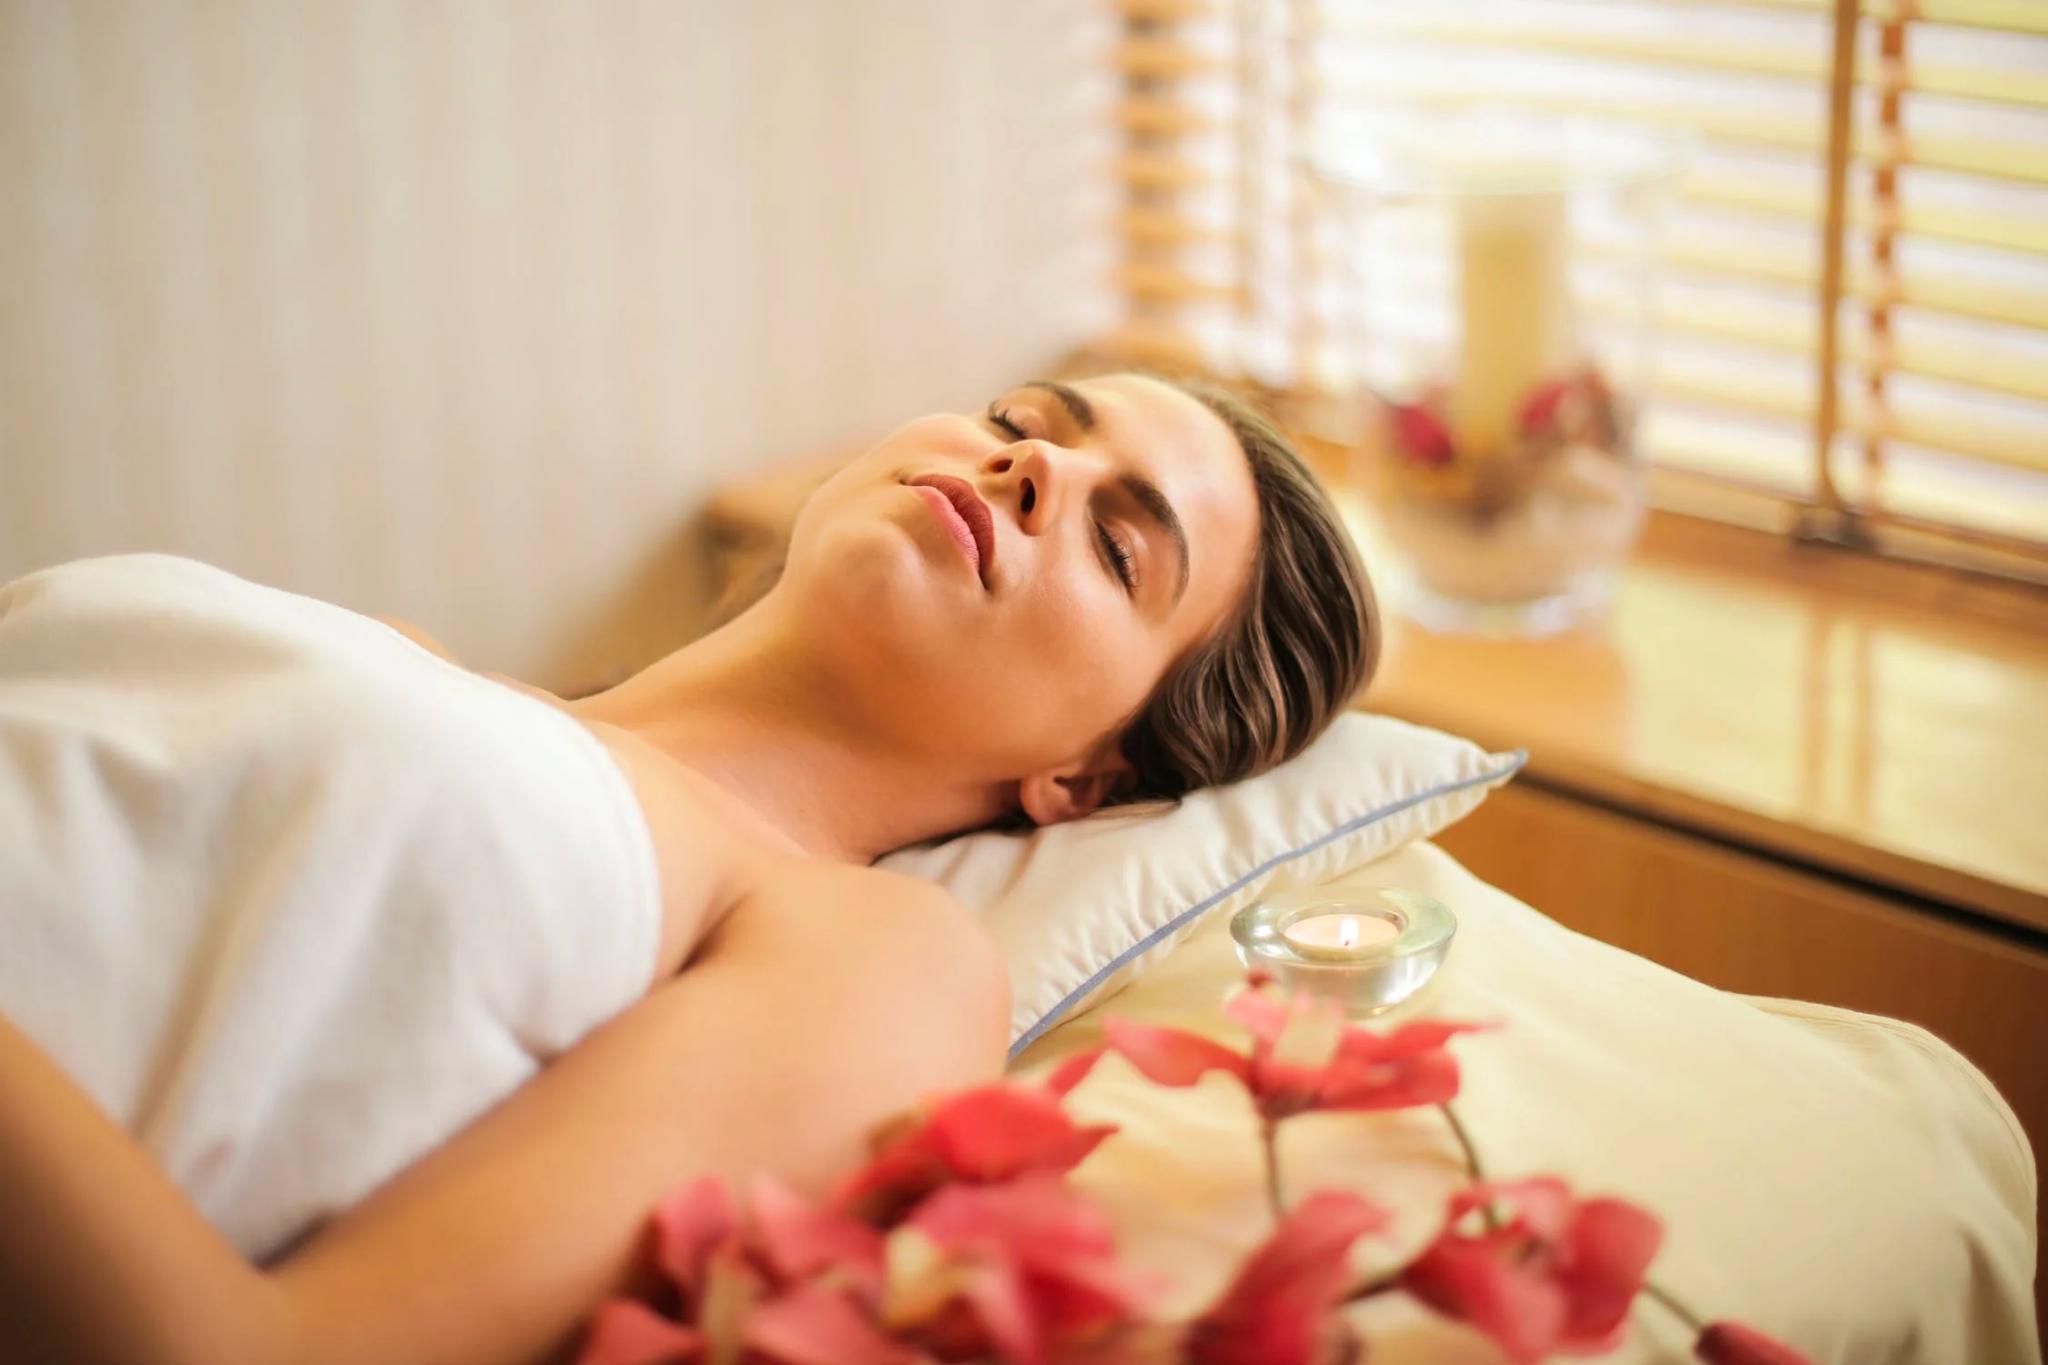 A person lays on a massage table looking relaxed and happy.